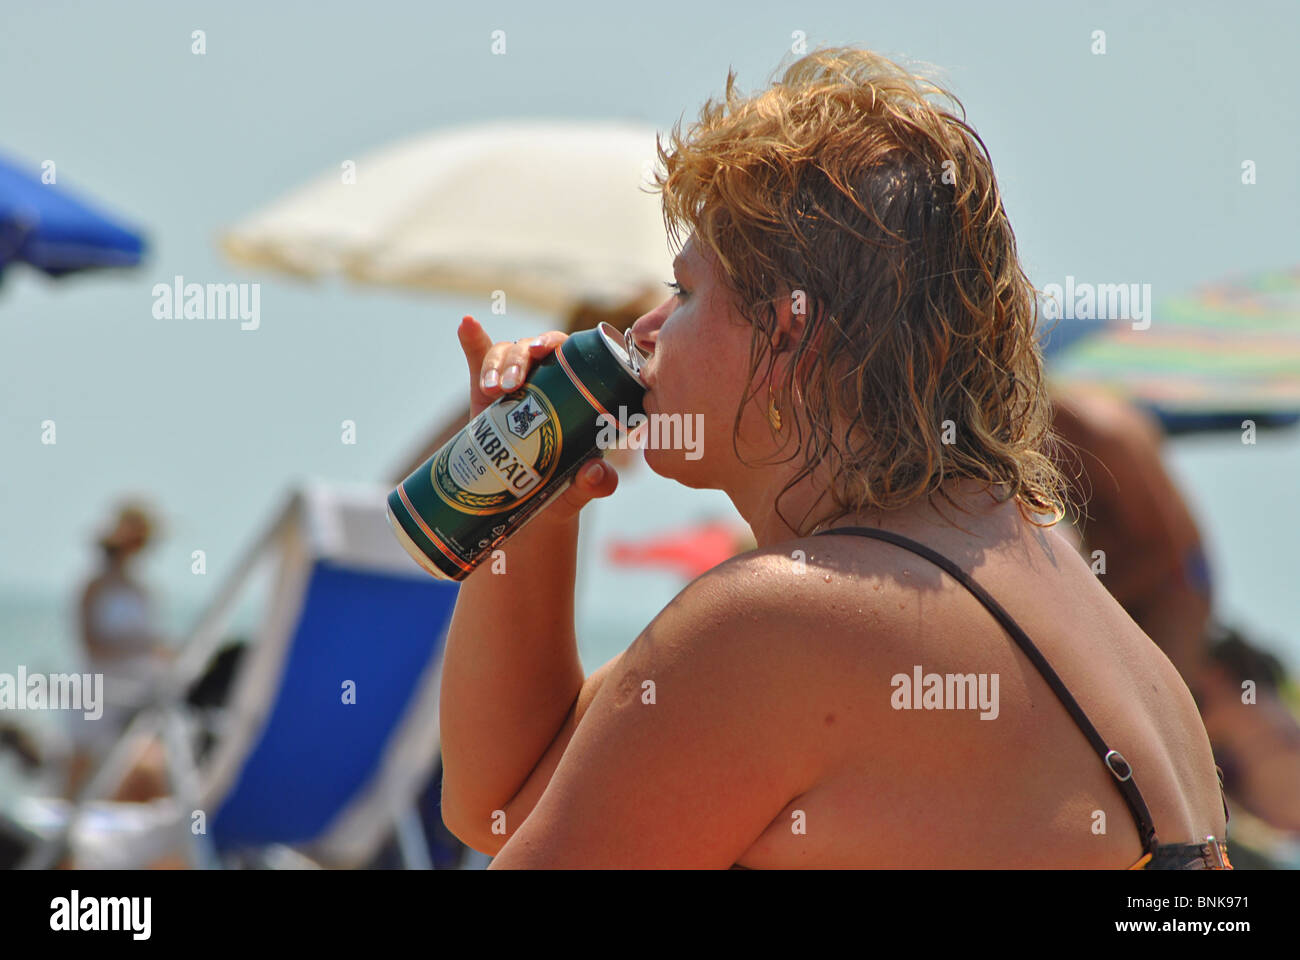 Obese woman drinking beer on the beach, Lido, Italy Stock Photo